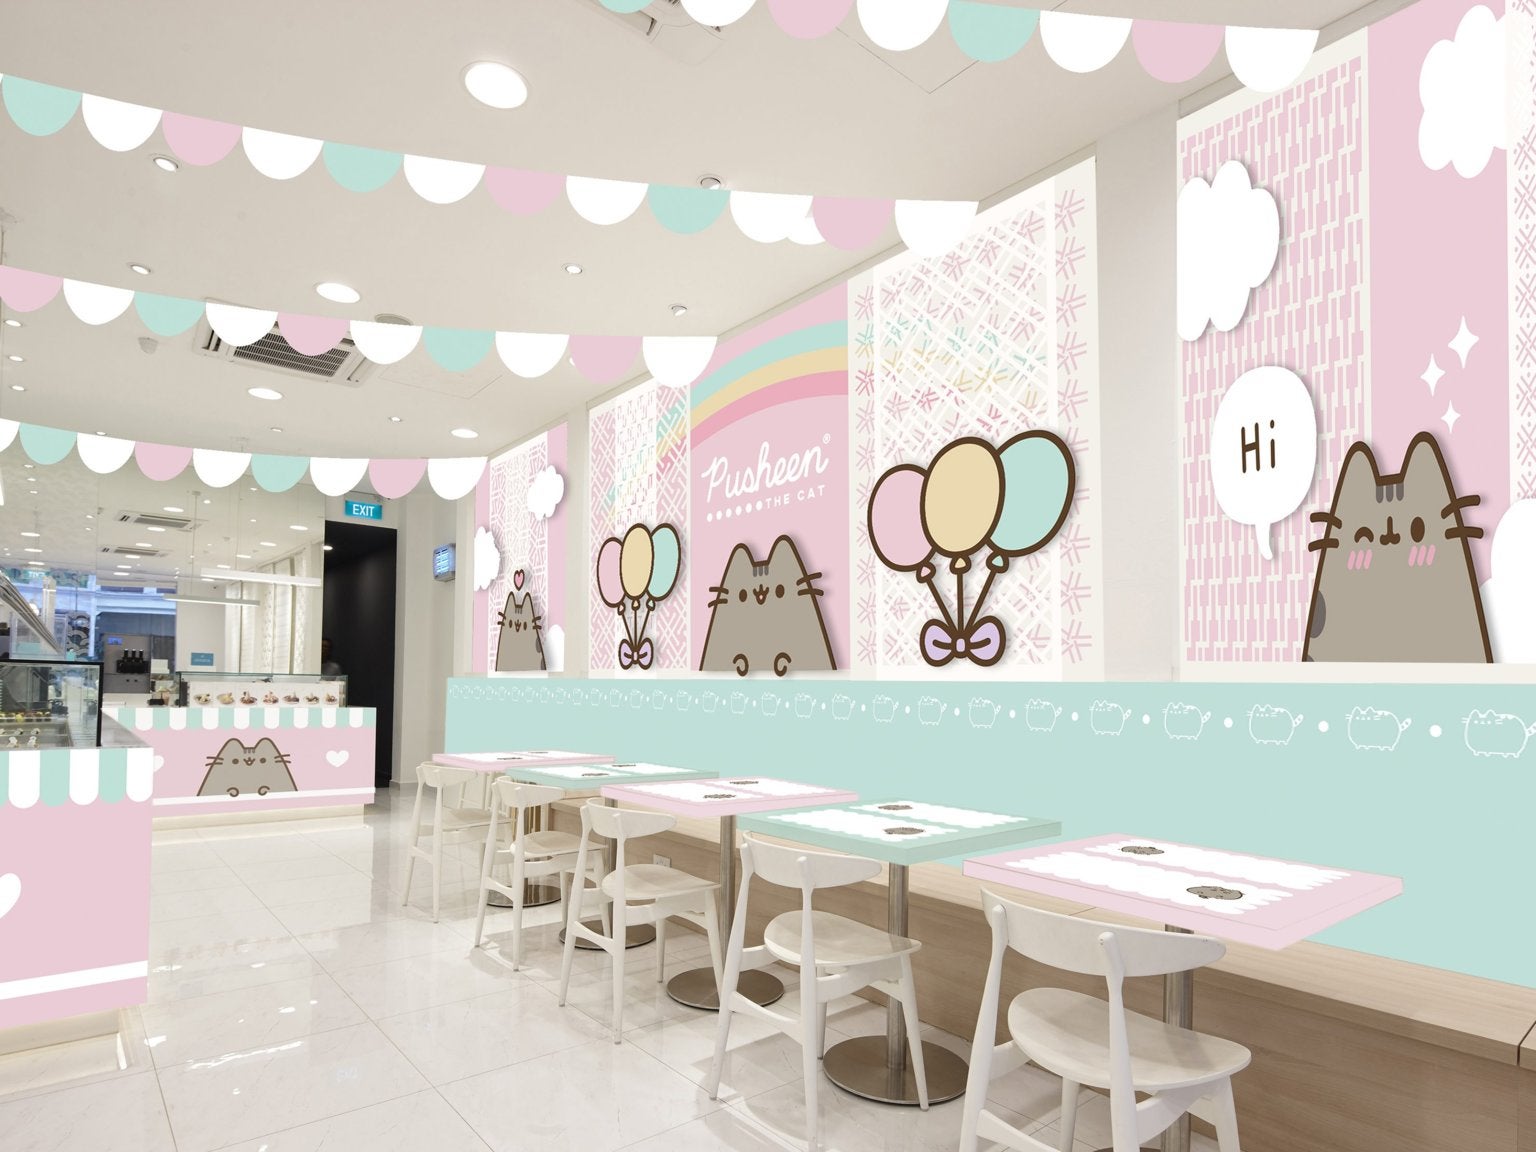 The World's First Pusheen Cafe Is Opening in Jan 2019 in S'pore and Looks Super Insta-worthy - WORLD OF BUZZ